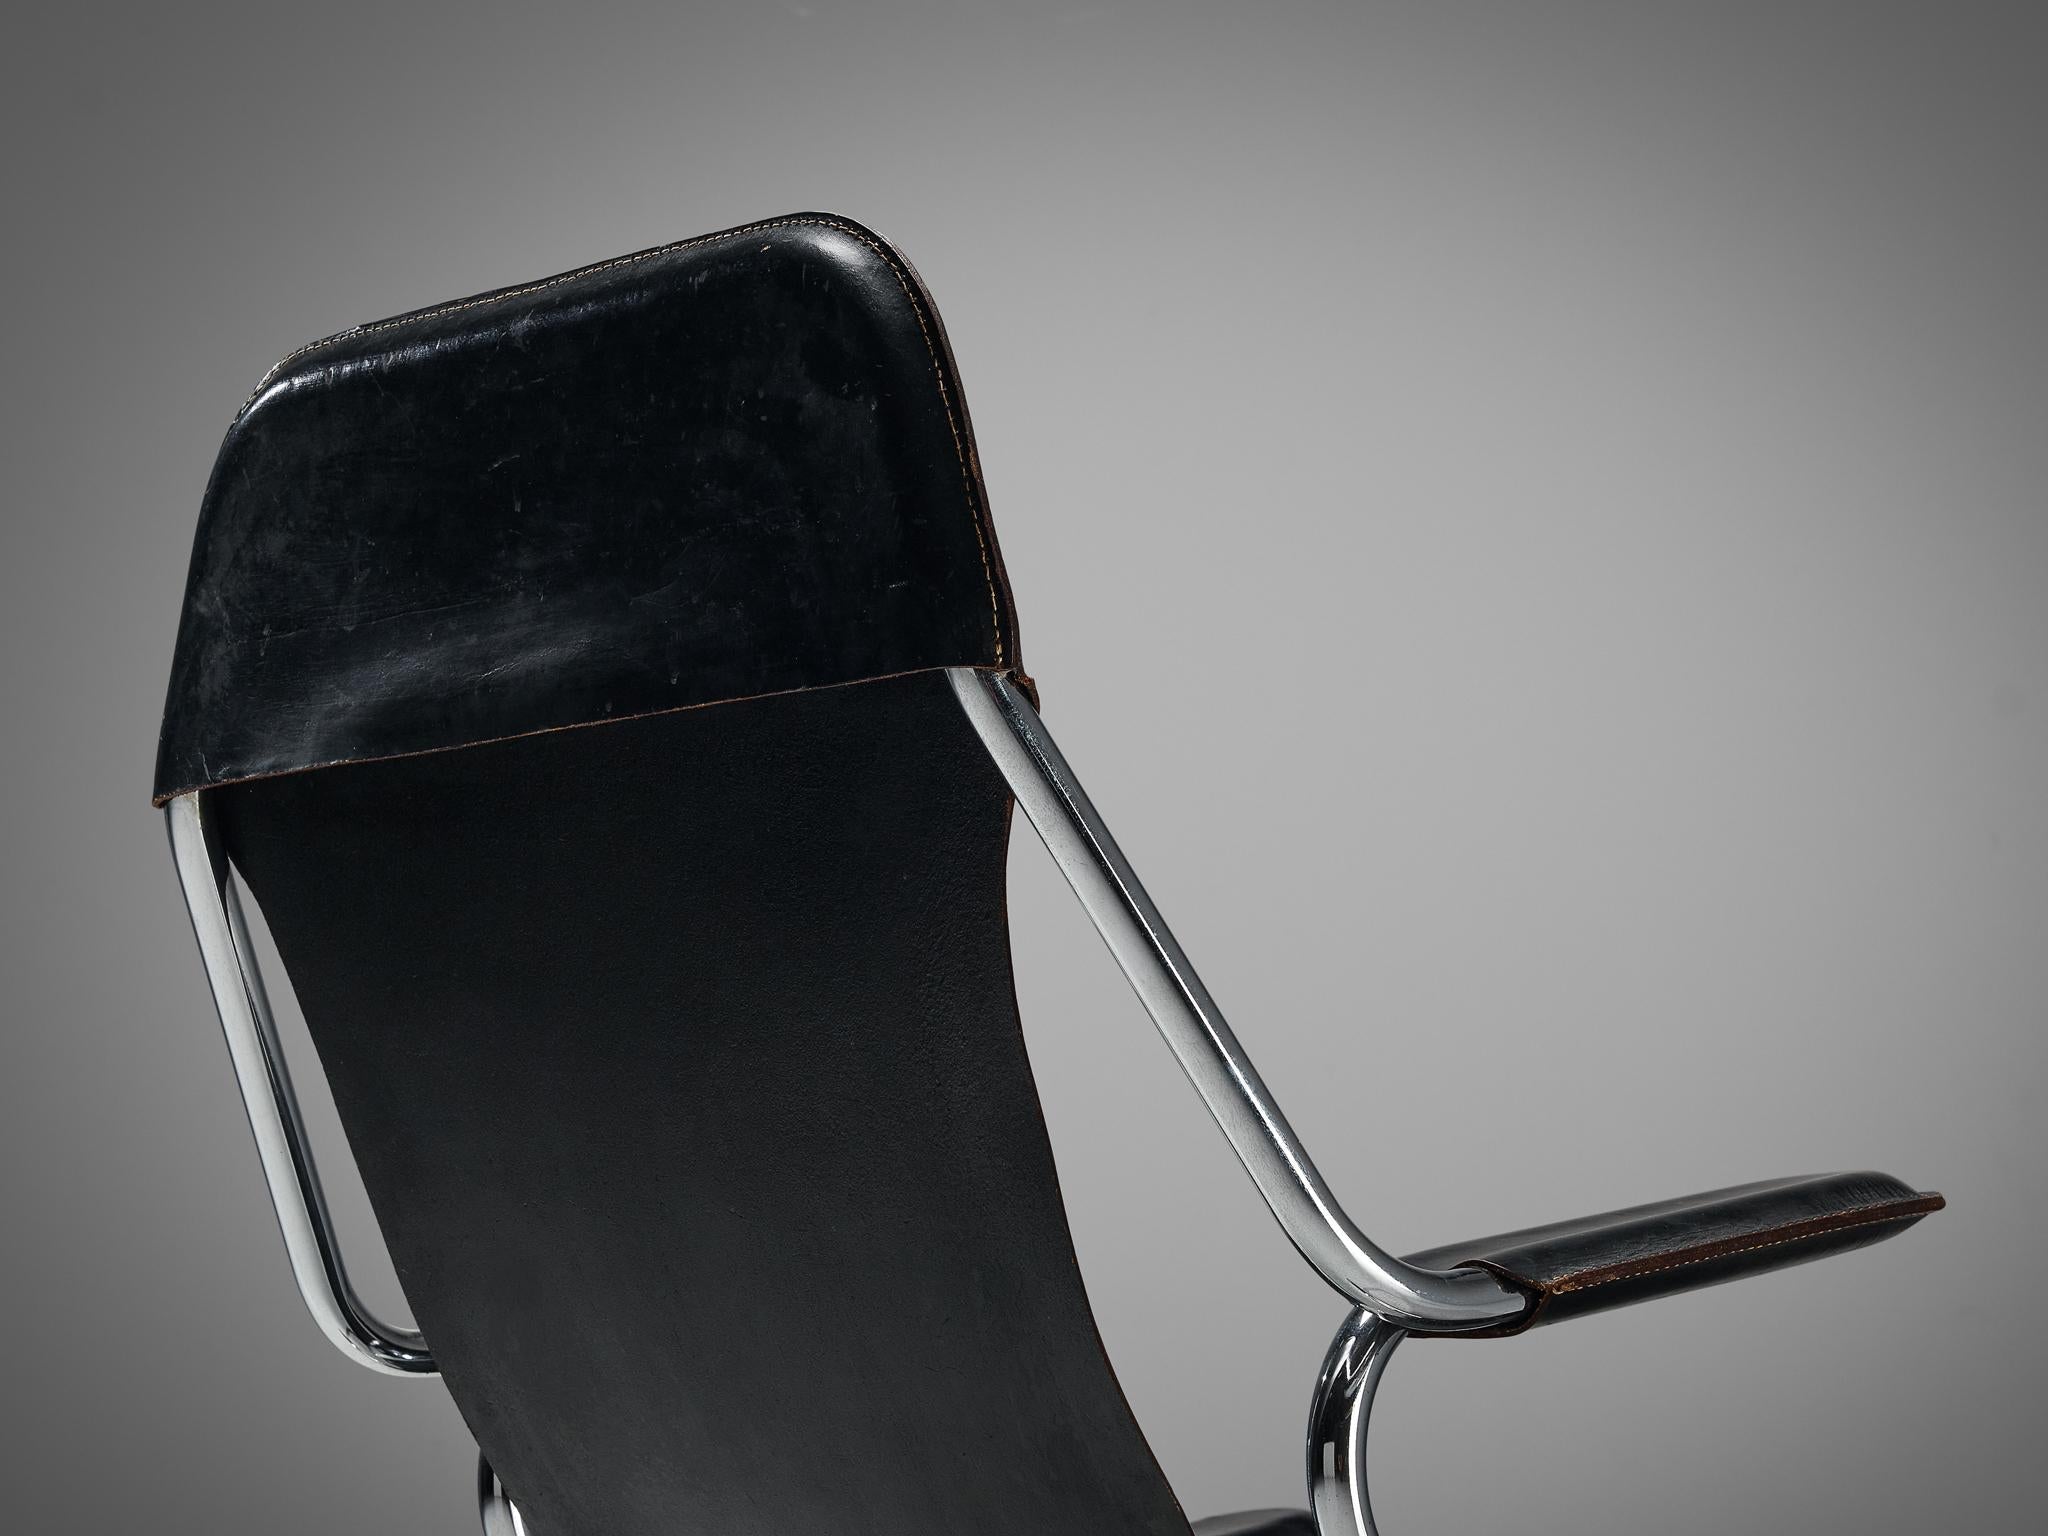 Tubular Lounge Chair in Black Leather